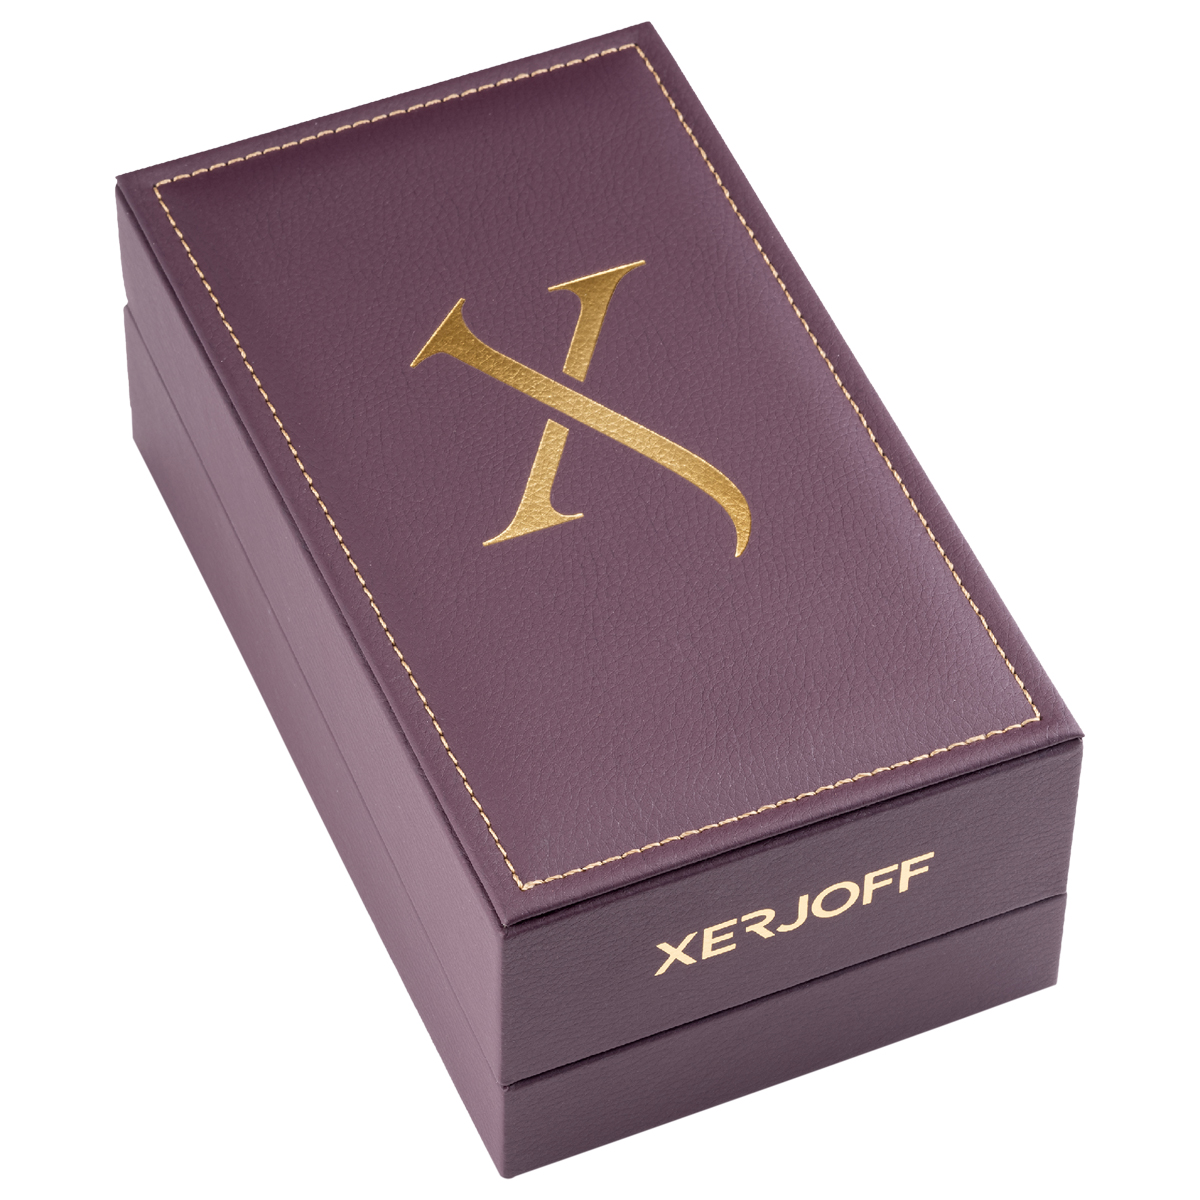 Xerjoff - Join The Club More Than Words Parfum